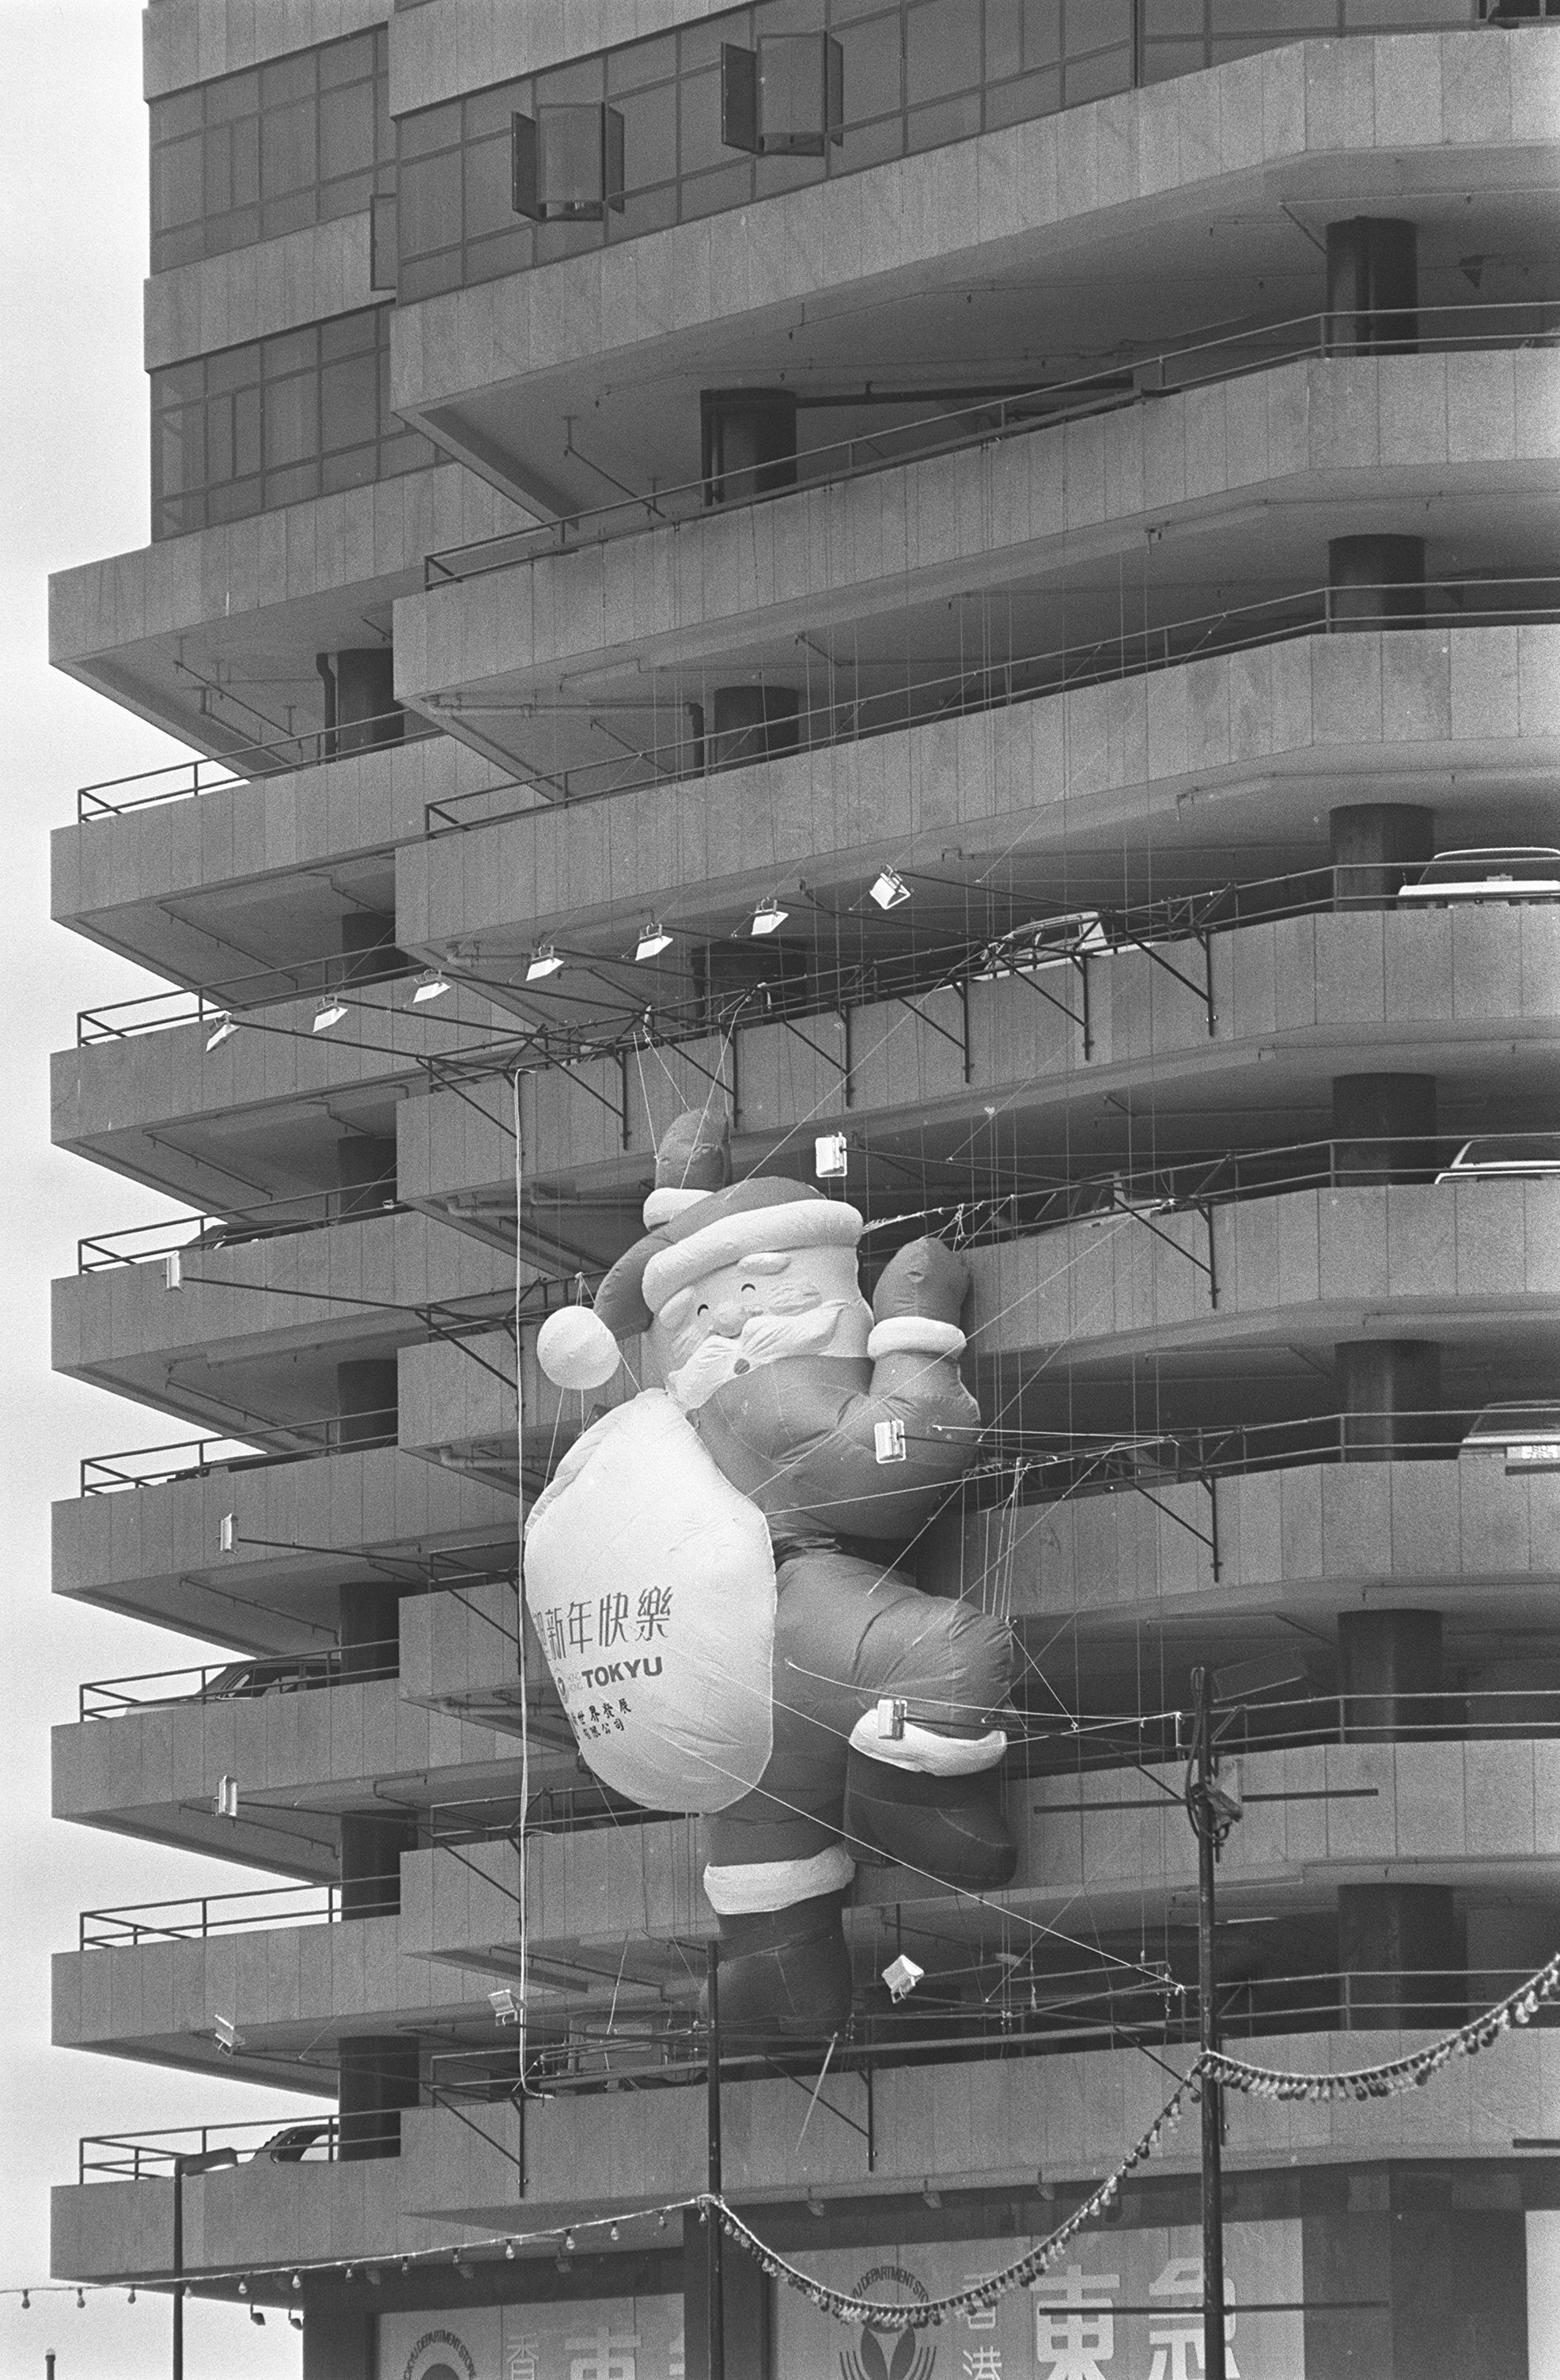 This gigantic Santa Claus is clearly going to have trouble going down the air-conditioning shaft of the New World Centre.